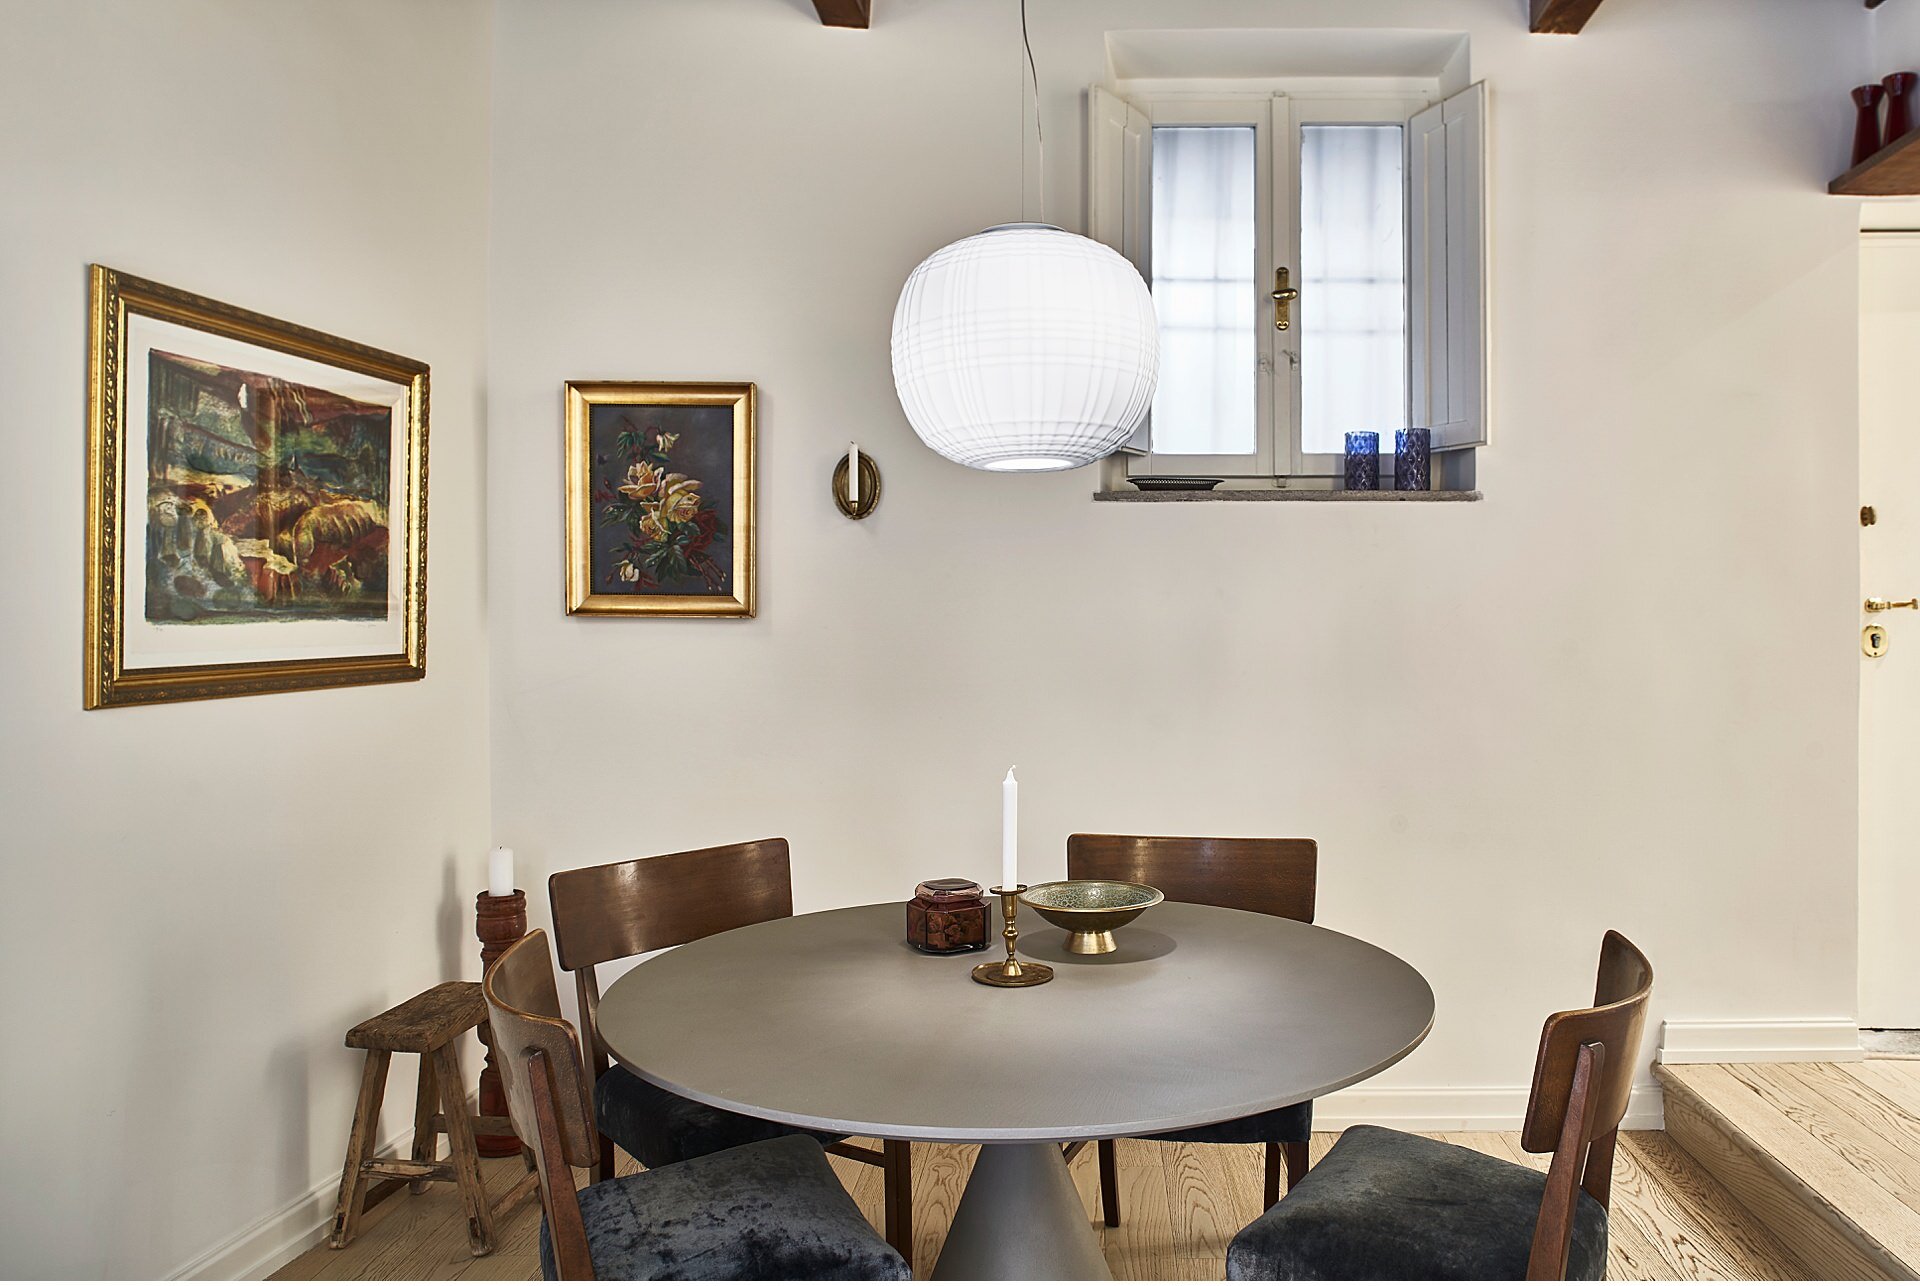  Nice one bedroom apartment in the historic center of Rome, near Piazza Navona. The apartment has been finely renovated and is used as a holiday home, large living room with dining room, kitchenette, and bedroom. Fine furnishings for a gem that can m